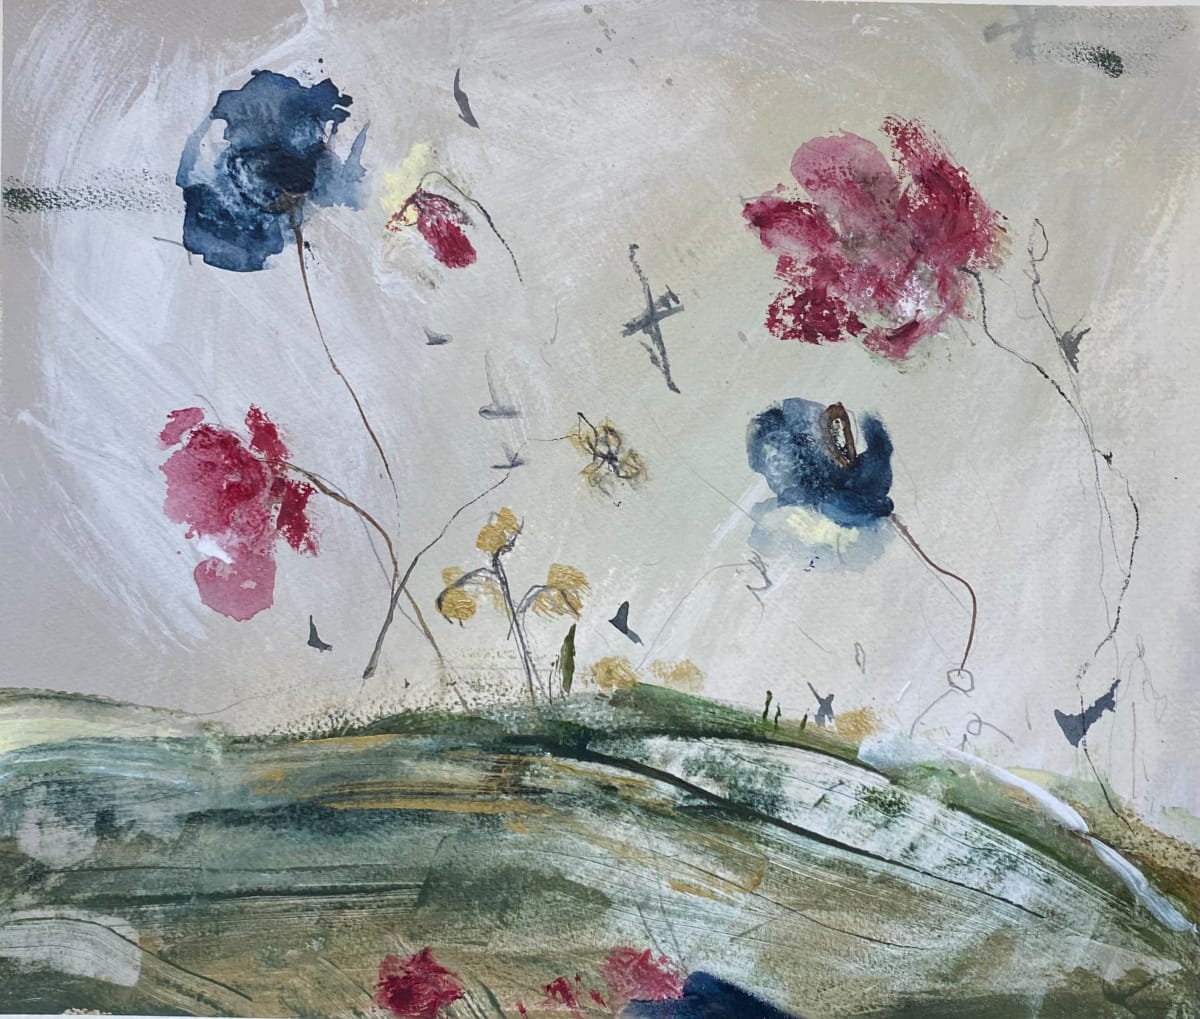 Untitled 0225 by John Worth  Image: Abstract Landscape: Wildflower Mark-making: Acrylic, Watercolour and Graphite on thick Waterford Paper